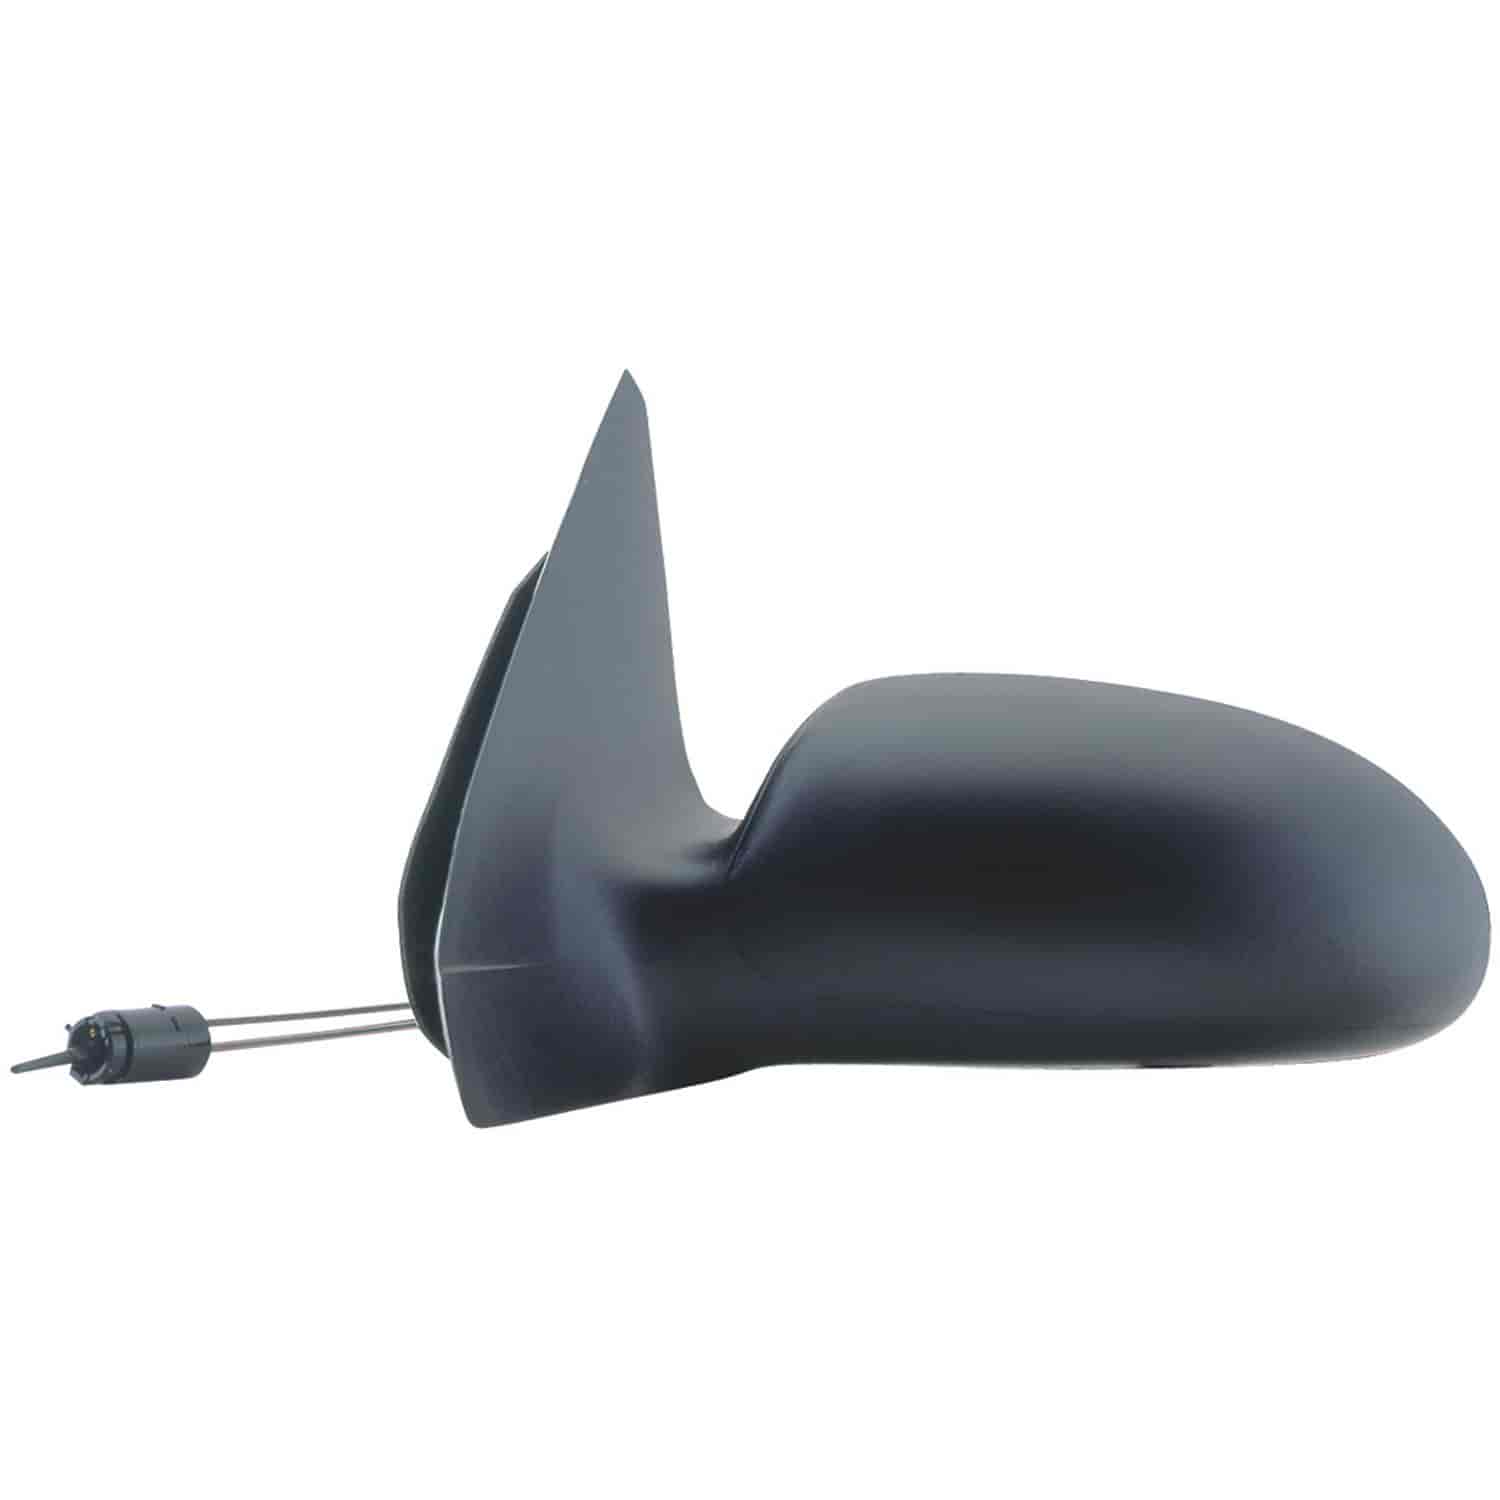 OEM Style Replacement mirror for 00-02 Ford Focus driver side mirror tested to fit and function like